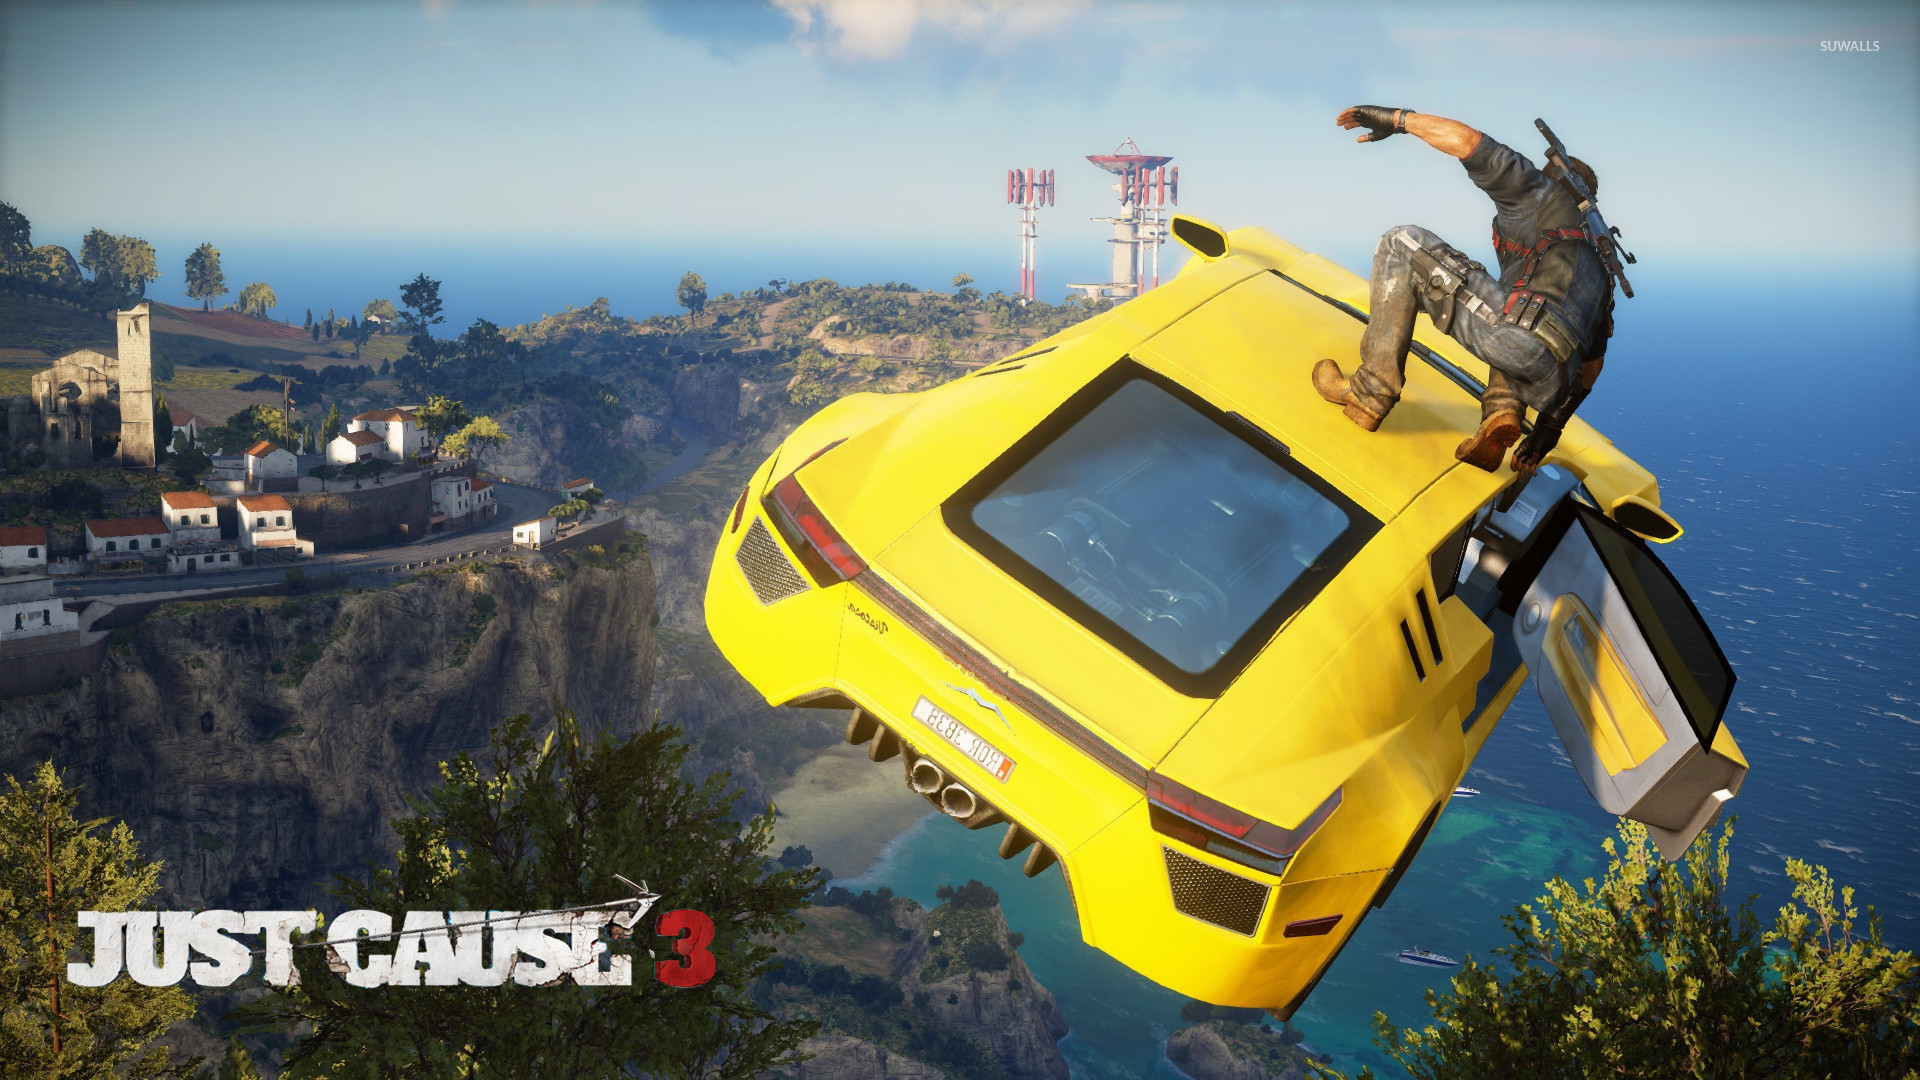 1920x1080 Rico Rodriguez on the top of a car - Just Cause 3 wallpaper